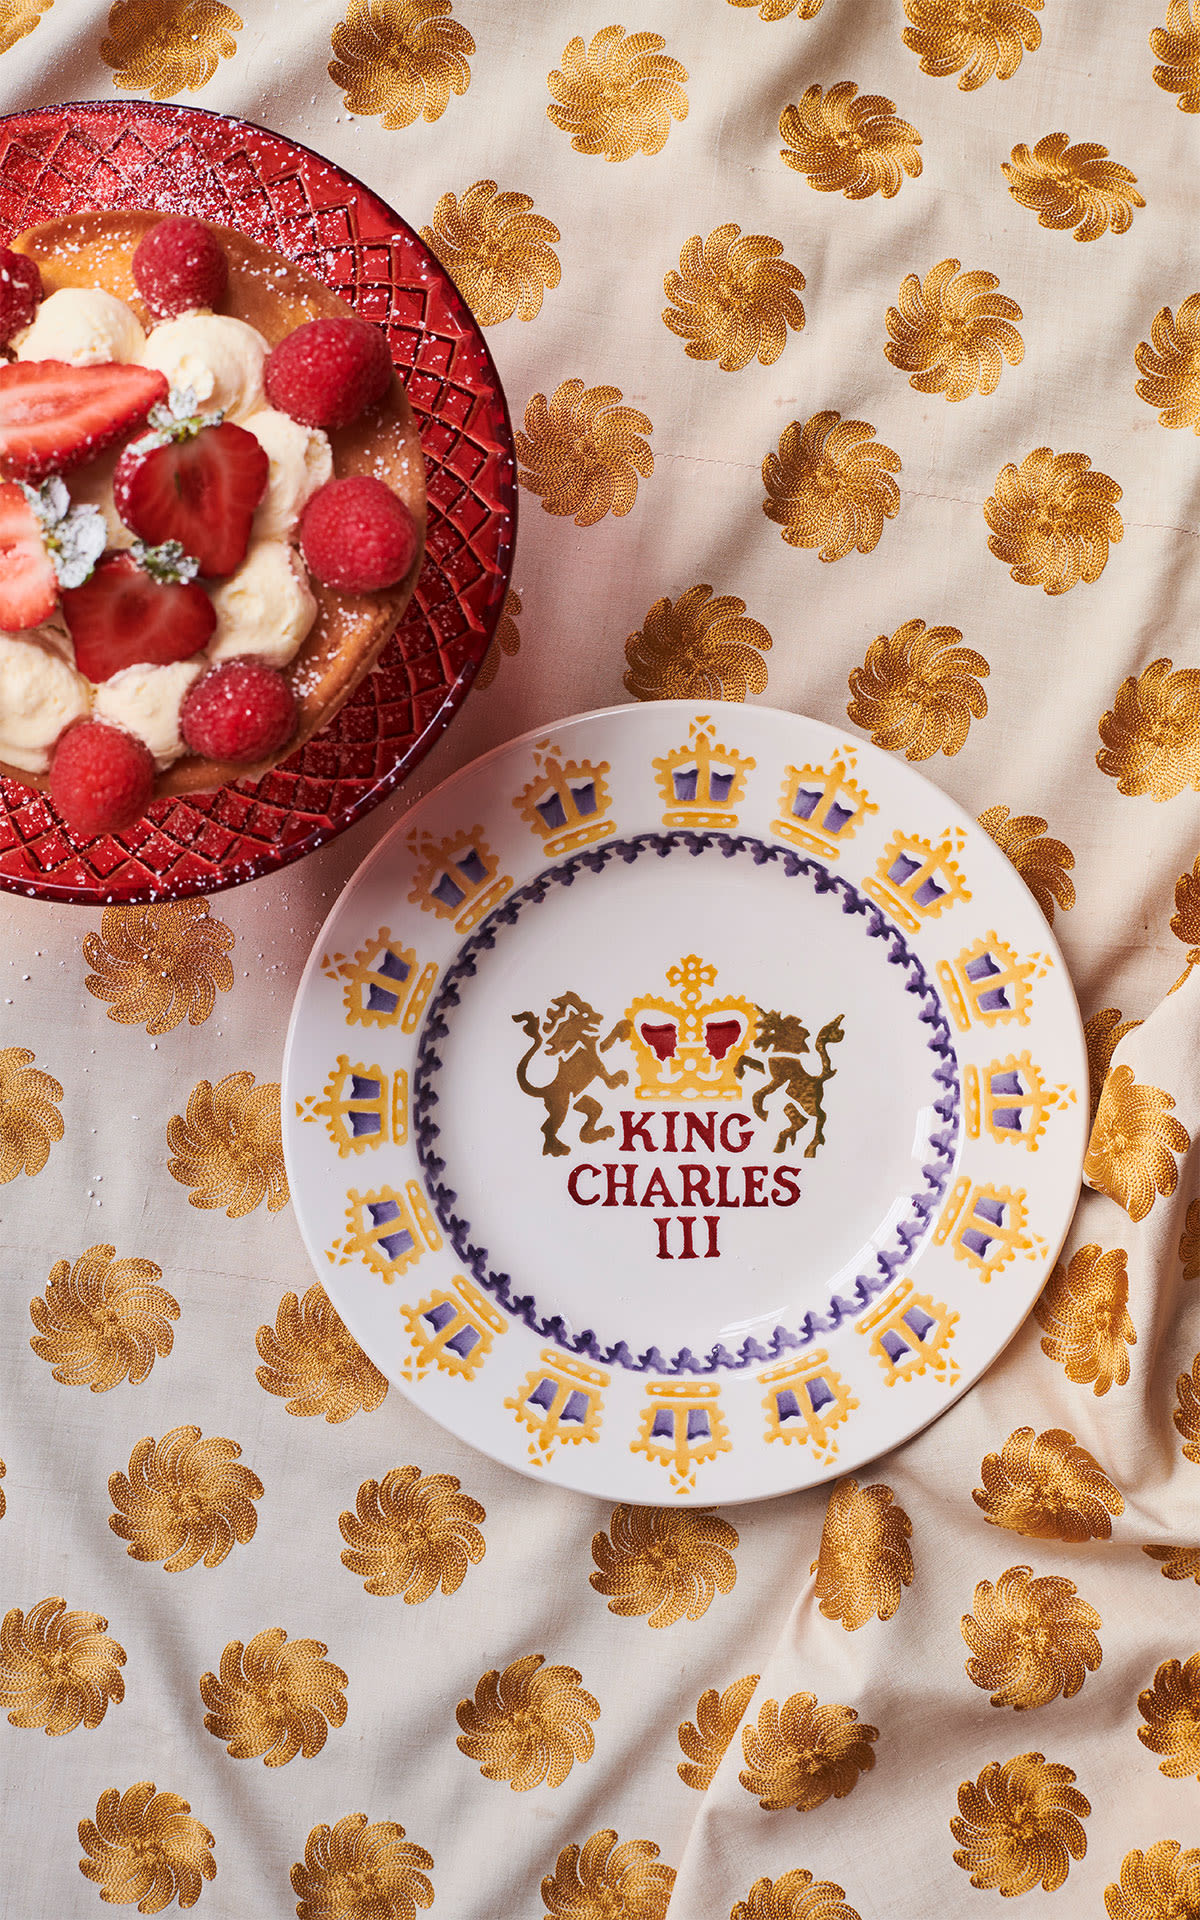 Emma Bridgewater King Charles III plate from Bicester Village